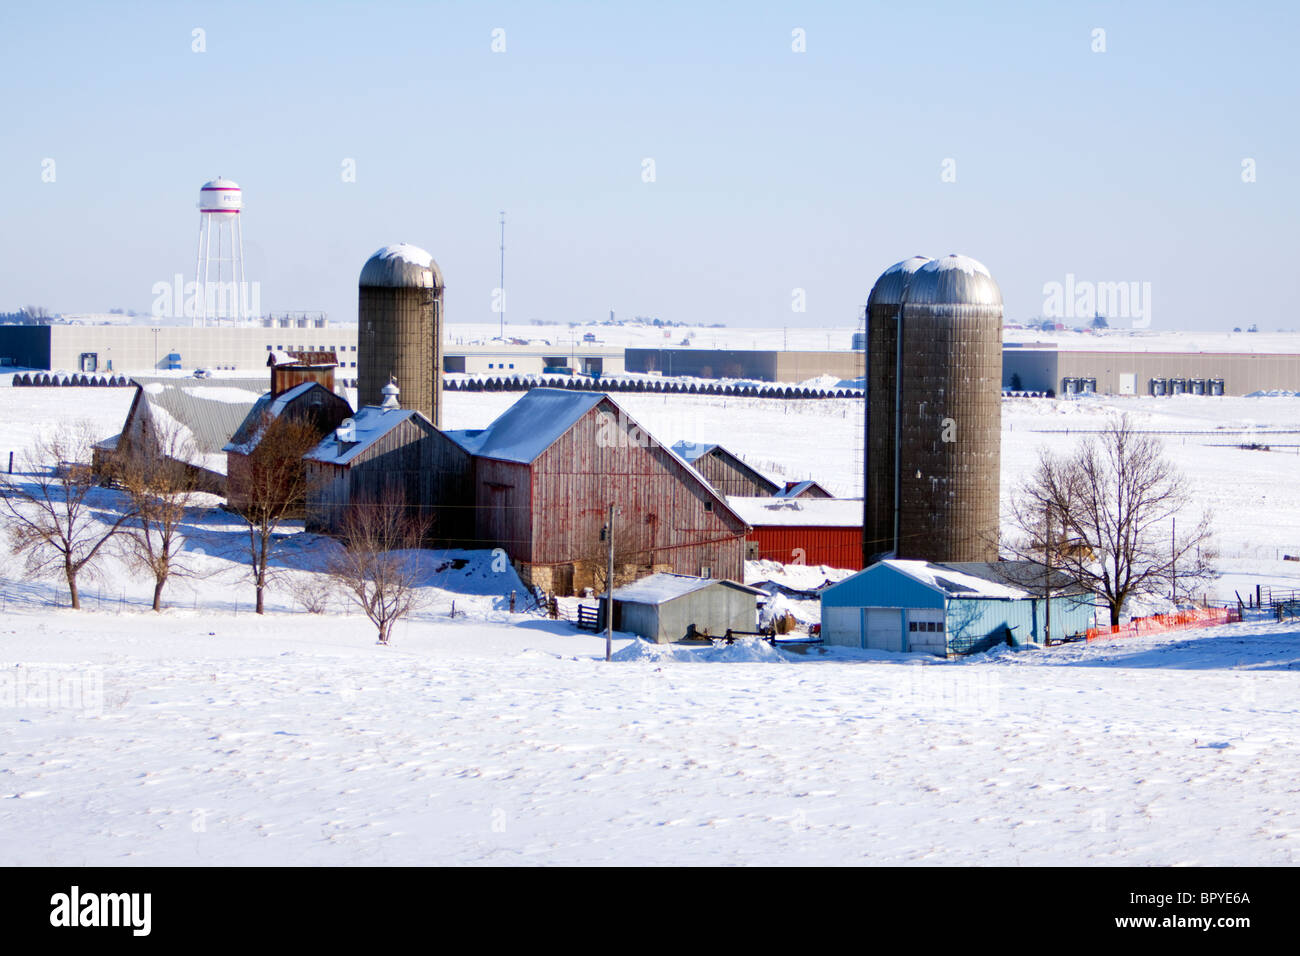 A barn in Iowa with an industrial park encroaching during winter. Stock Photo